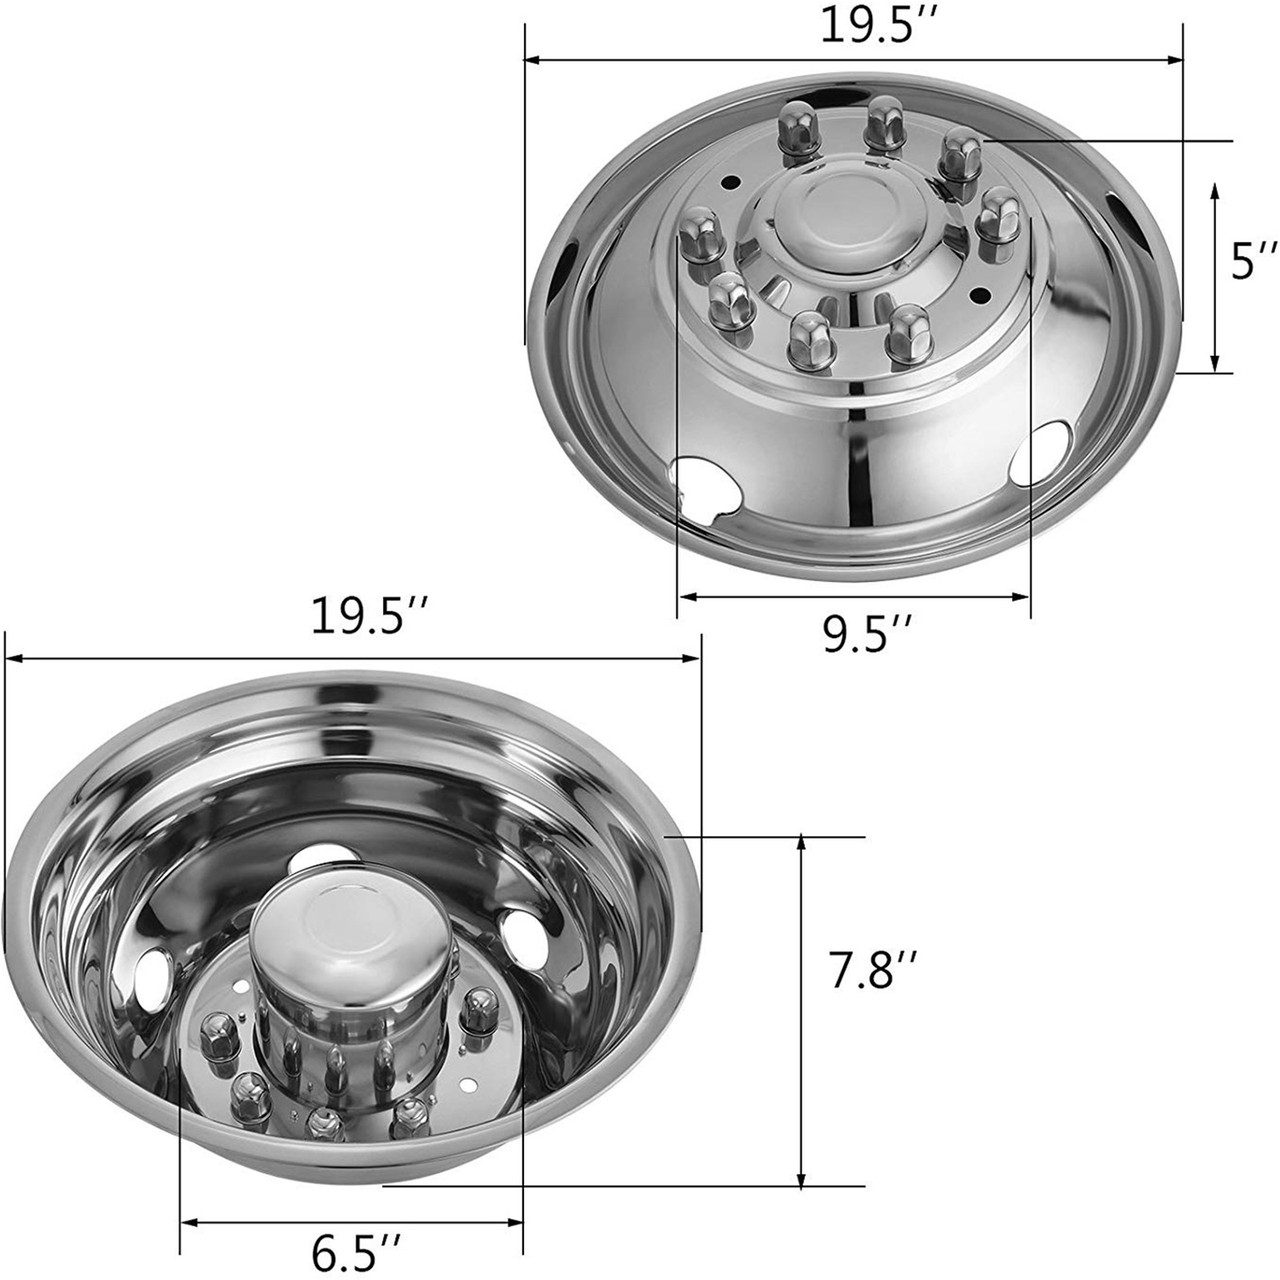 Stainless Steel Front And Rear Wheel Simulators 19.5 Inch 10 Lug Wheel Simulator 4PCS of Hand Hole Hubcap Kit Compatible With 2005-2021 Ford Super Duty F450 - F550 10 Lug Dually Trucks Only